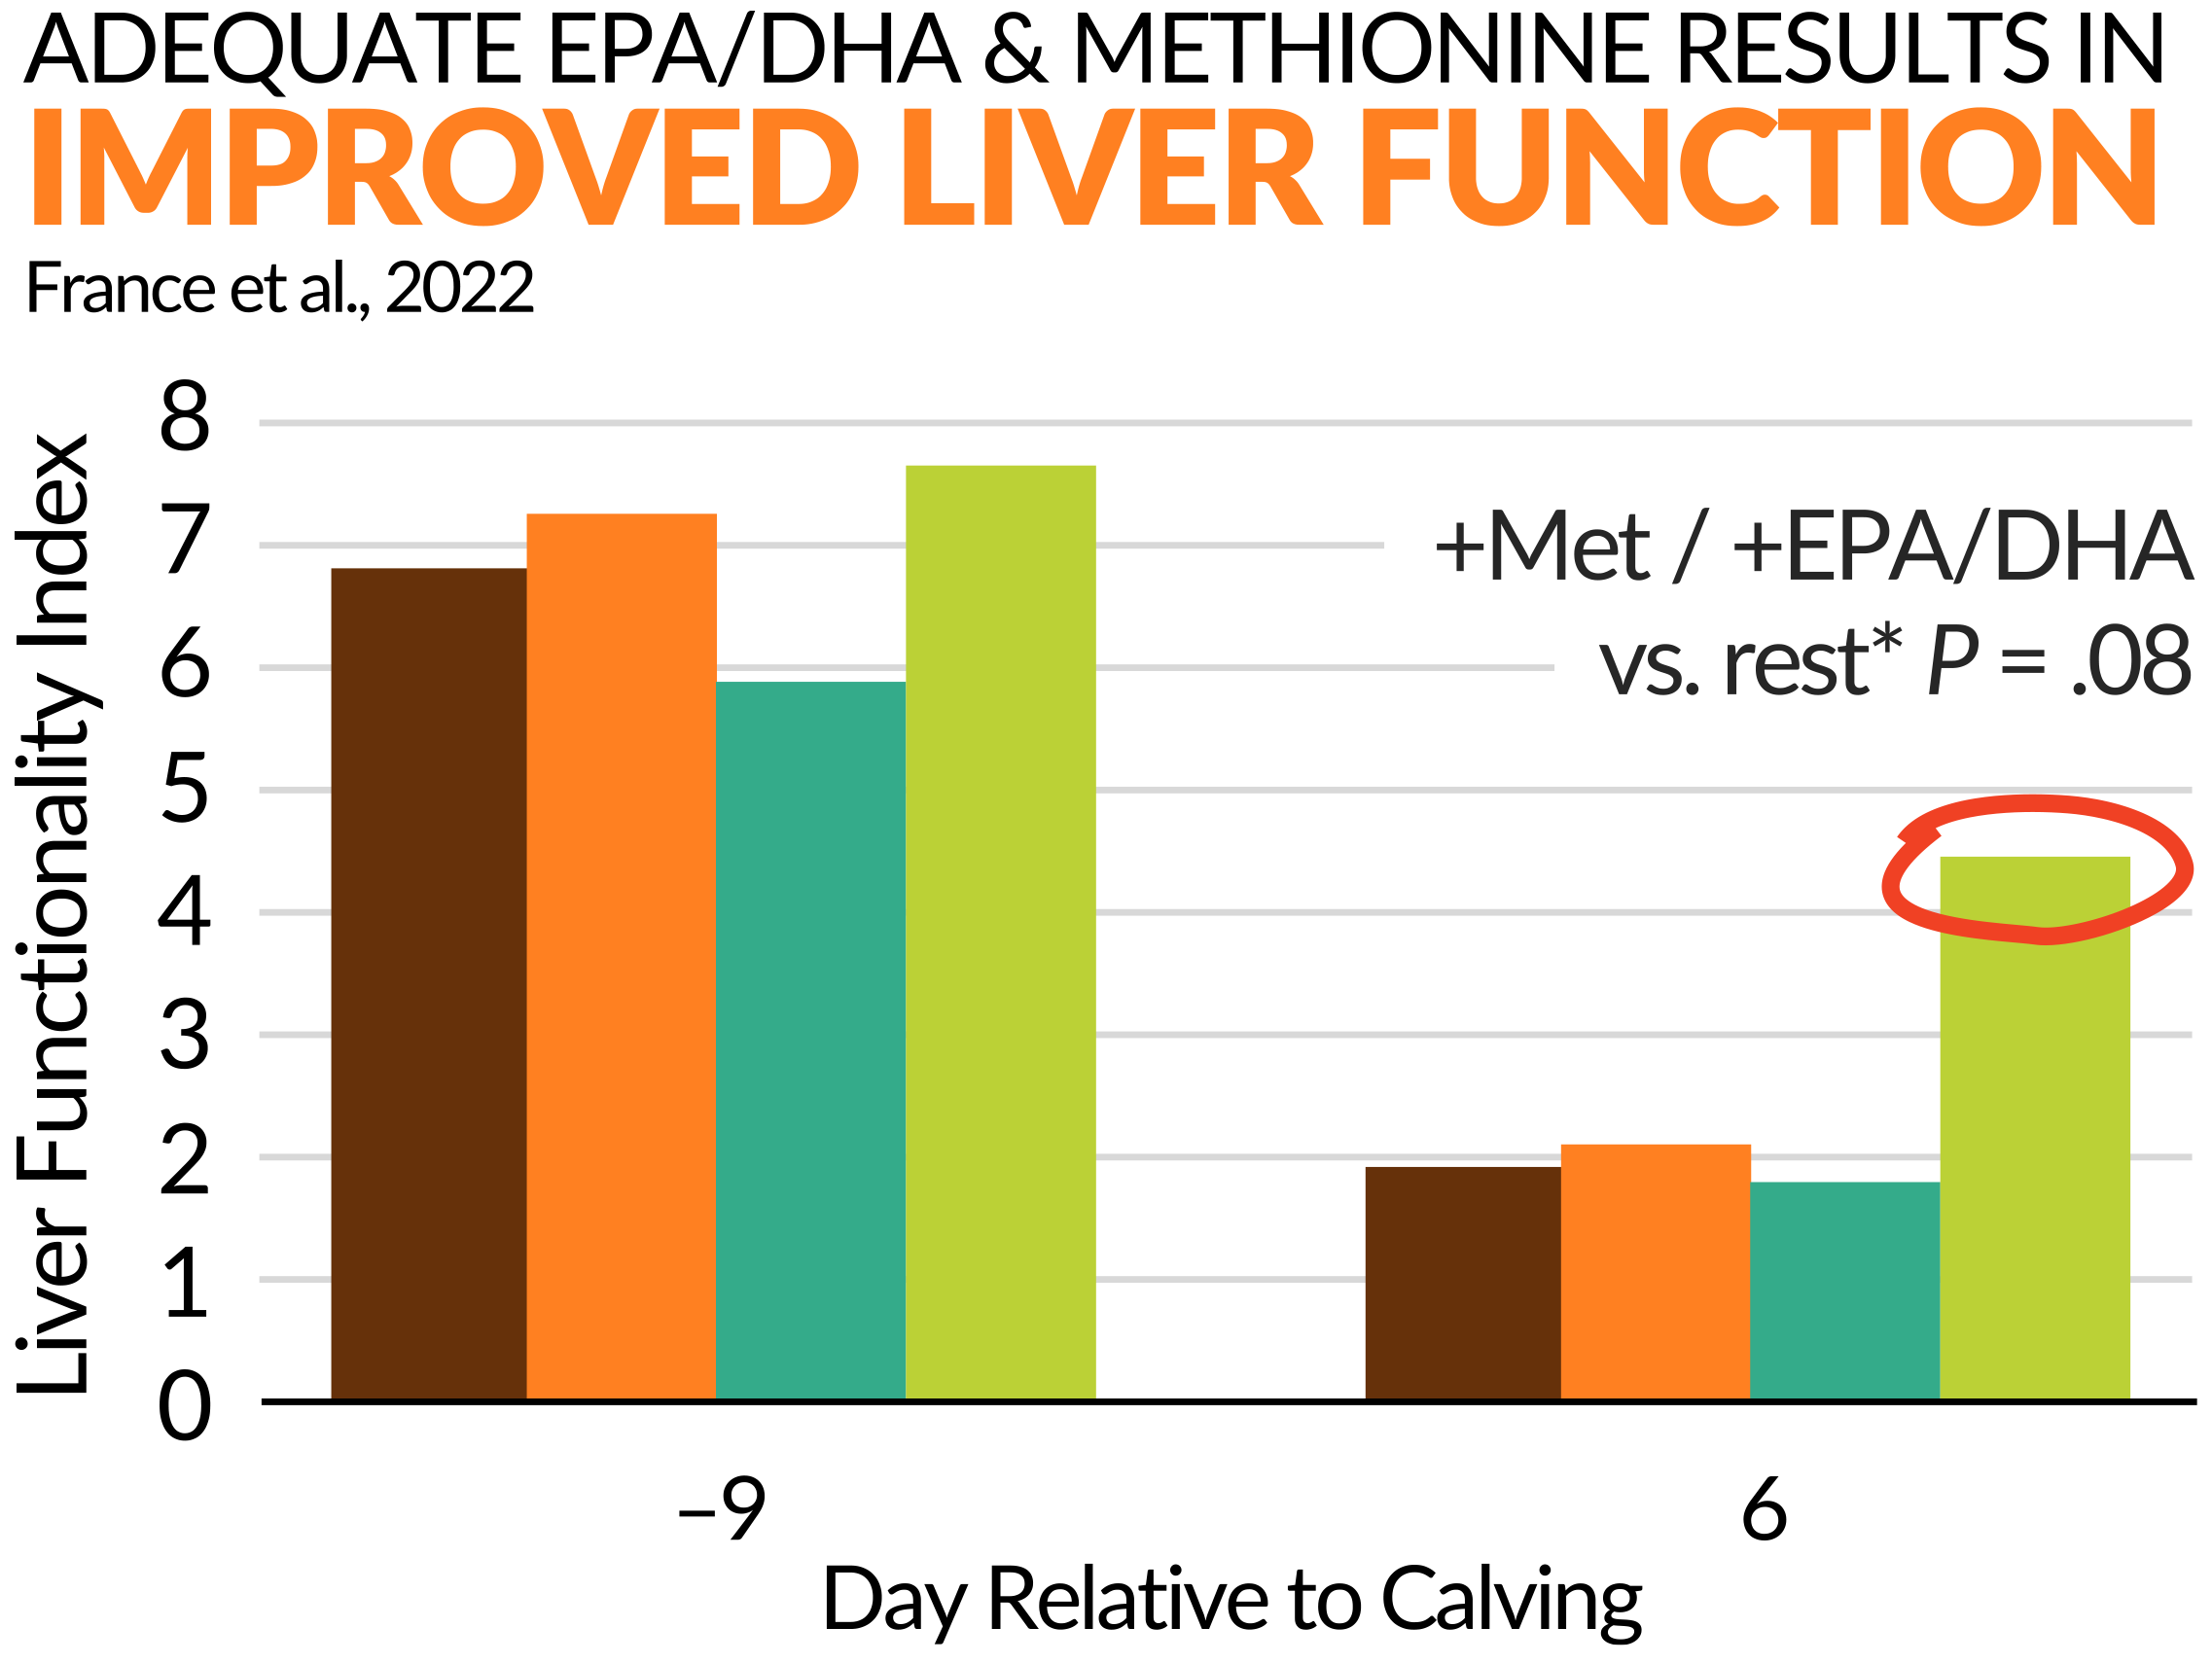 Chart showing improved liver function from feeding adequate EPA/DHA and Methionine